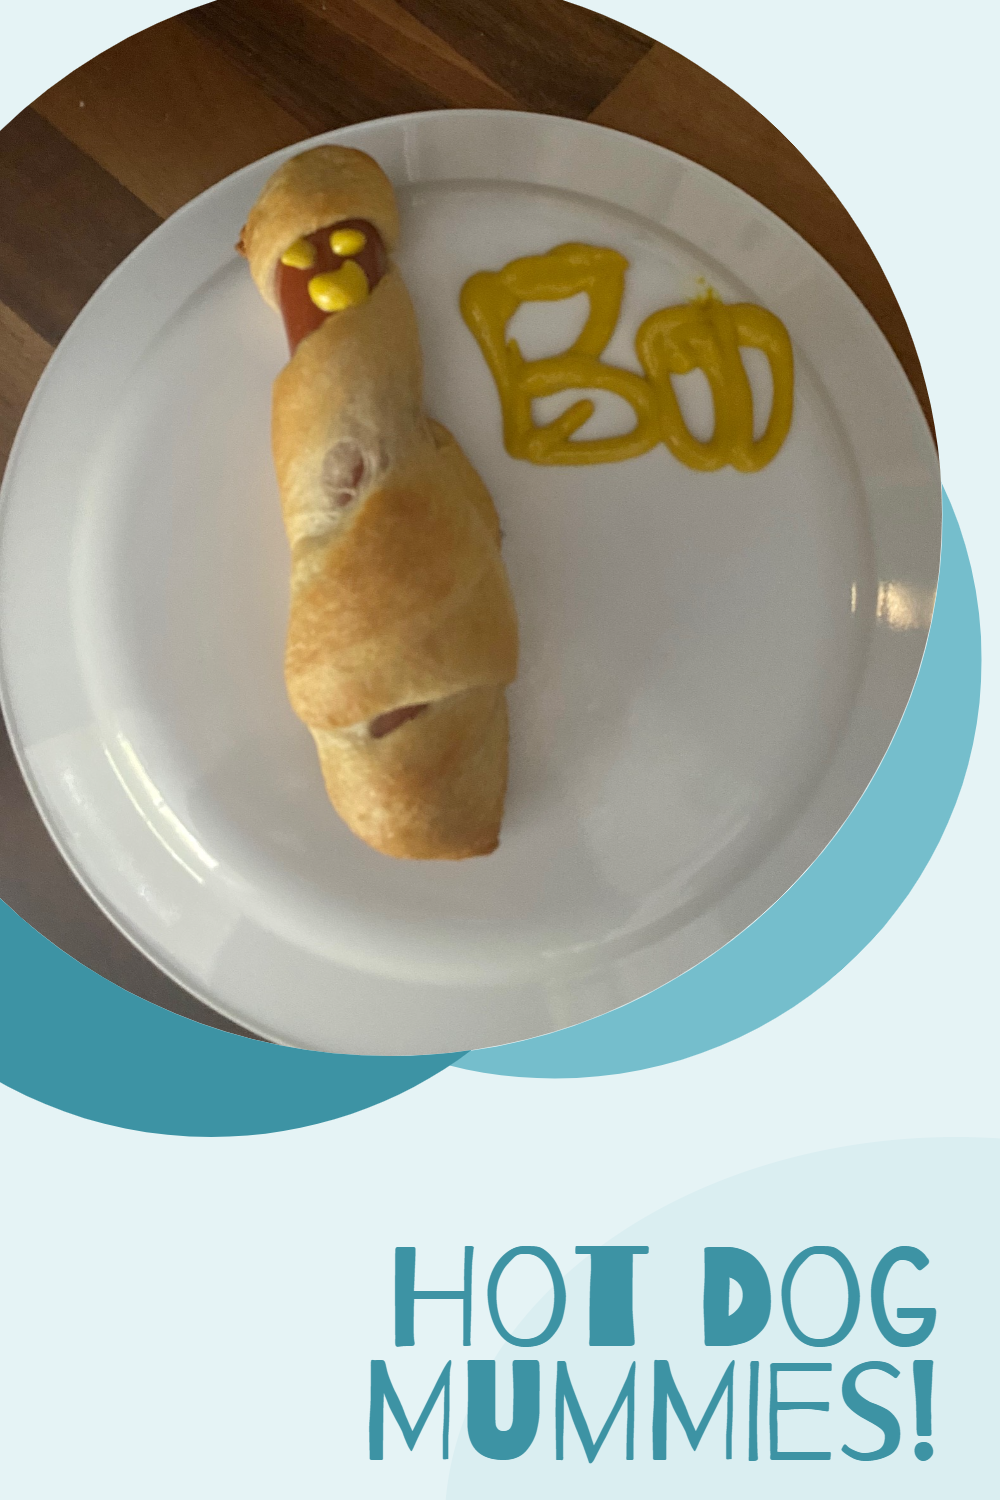 Picture of a hot dog mostly wrapped in a cooked crescent roll. The small bit of hot dog showing at the top has a mustard smiley face drawn on it. The word 'Boo' is also written to the right in mustard. This is all on top of a white plate, which is on top of a wooden counter top. It is surrounded with a light blue background. In the bottom right corner are the words, "Hot Dog Mummies!"